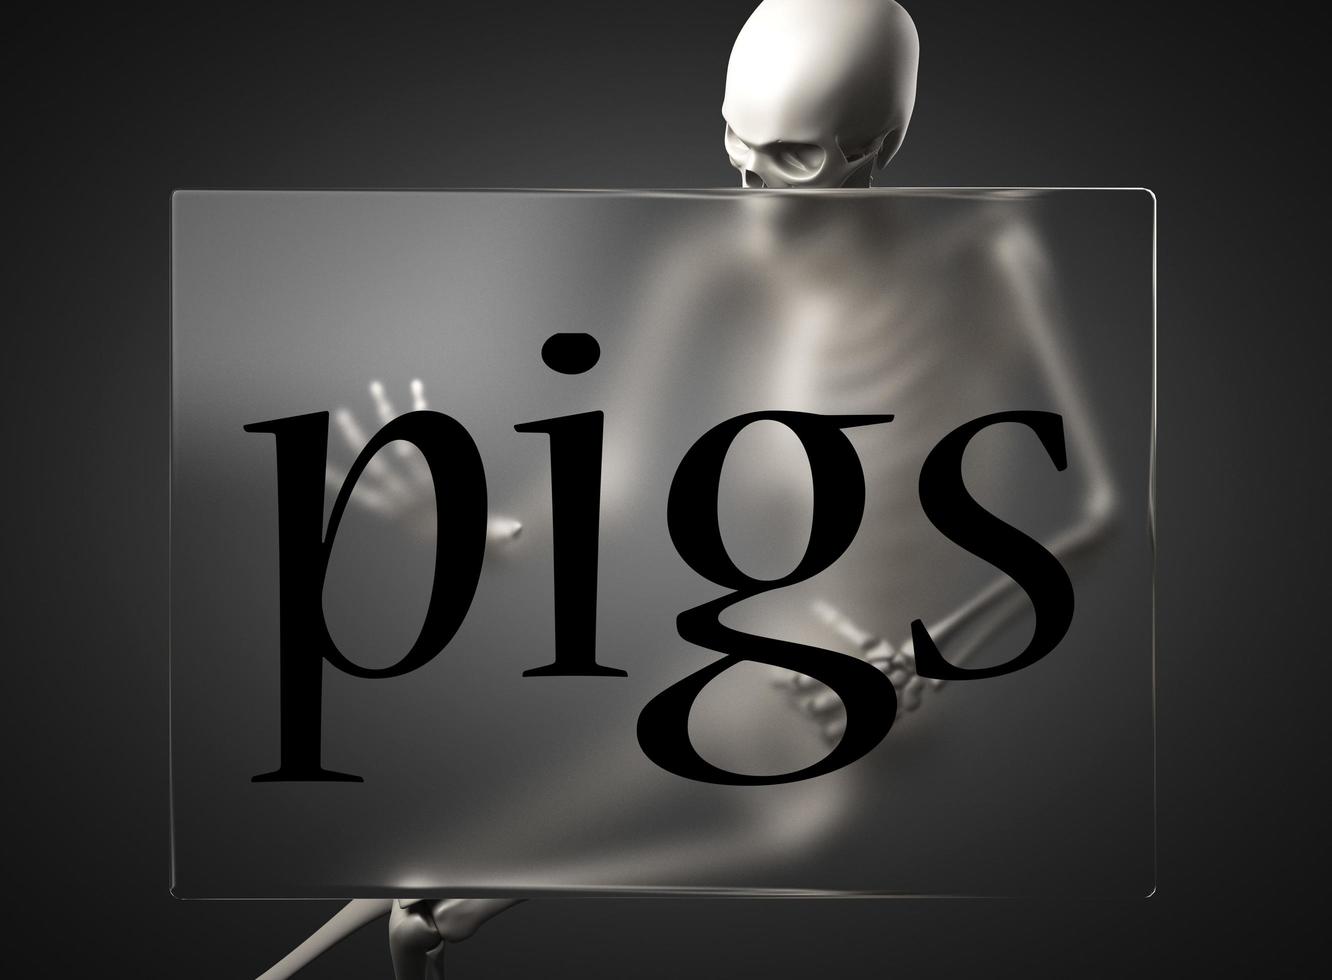 pigs word on glass and skeleton photo